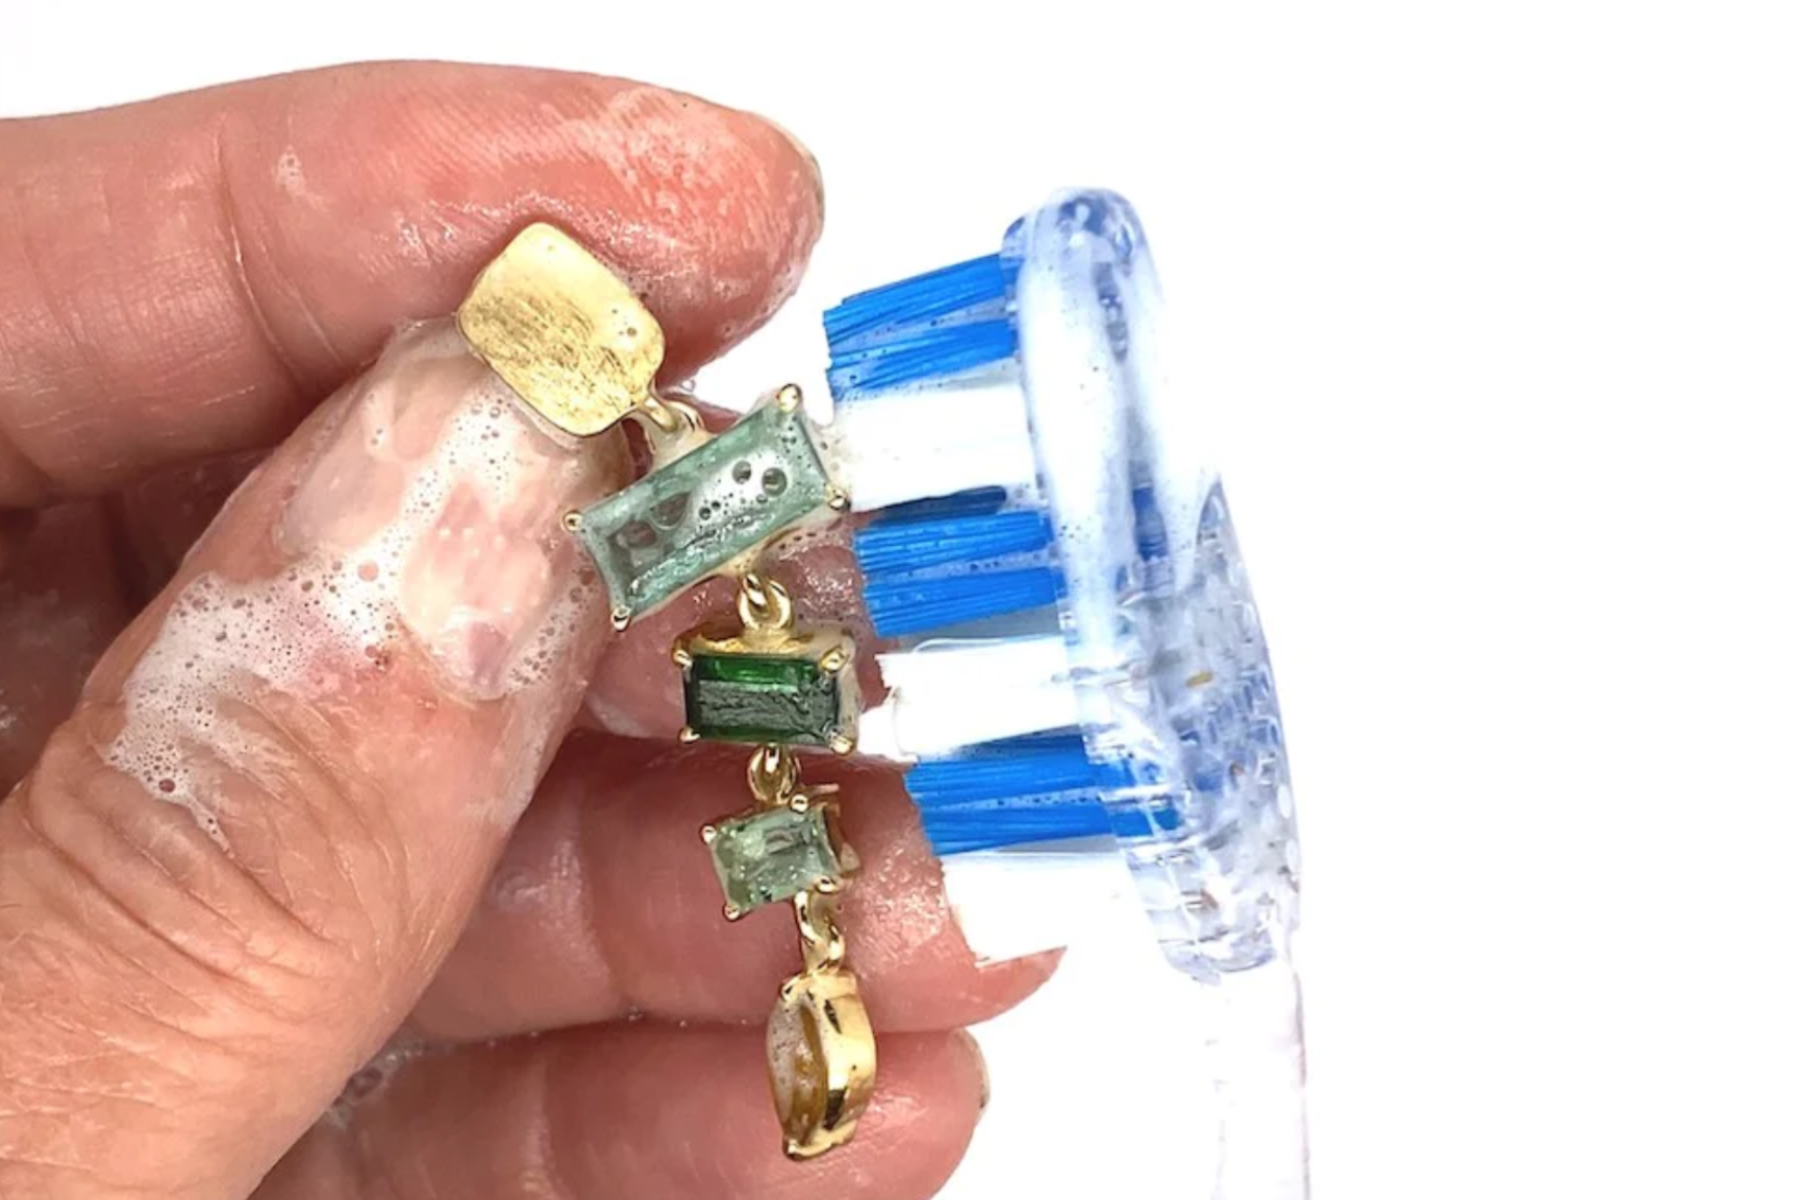 A soft brush is used to clean birthstone jewelry